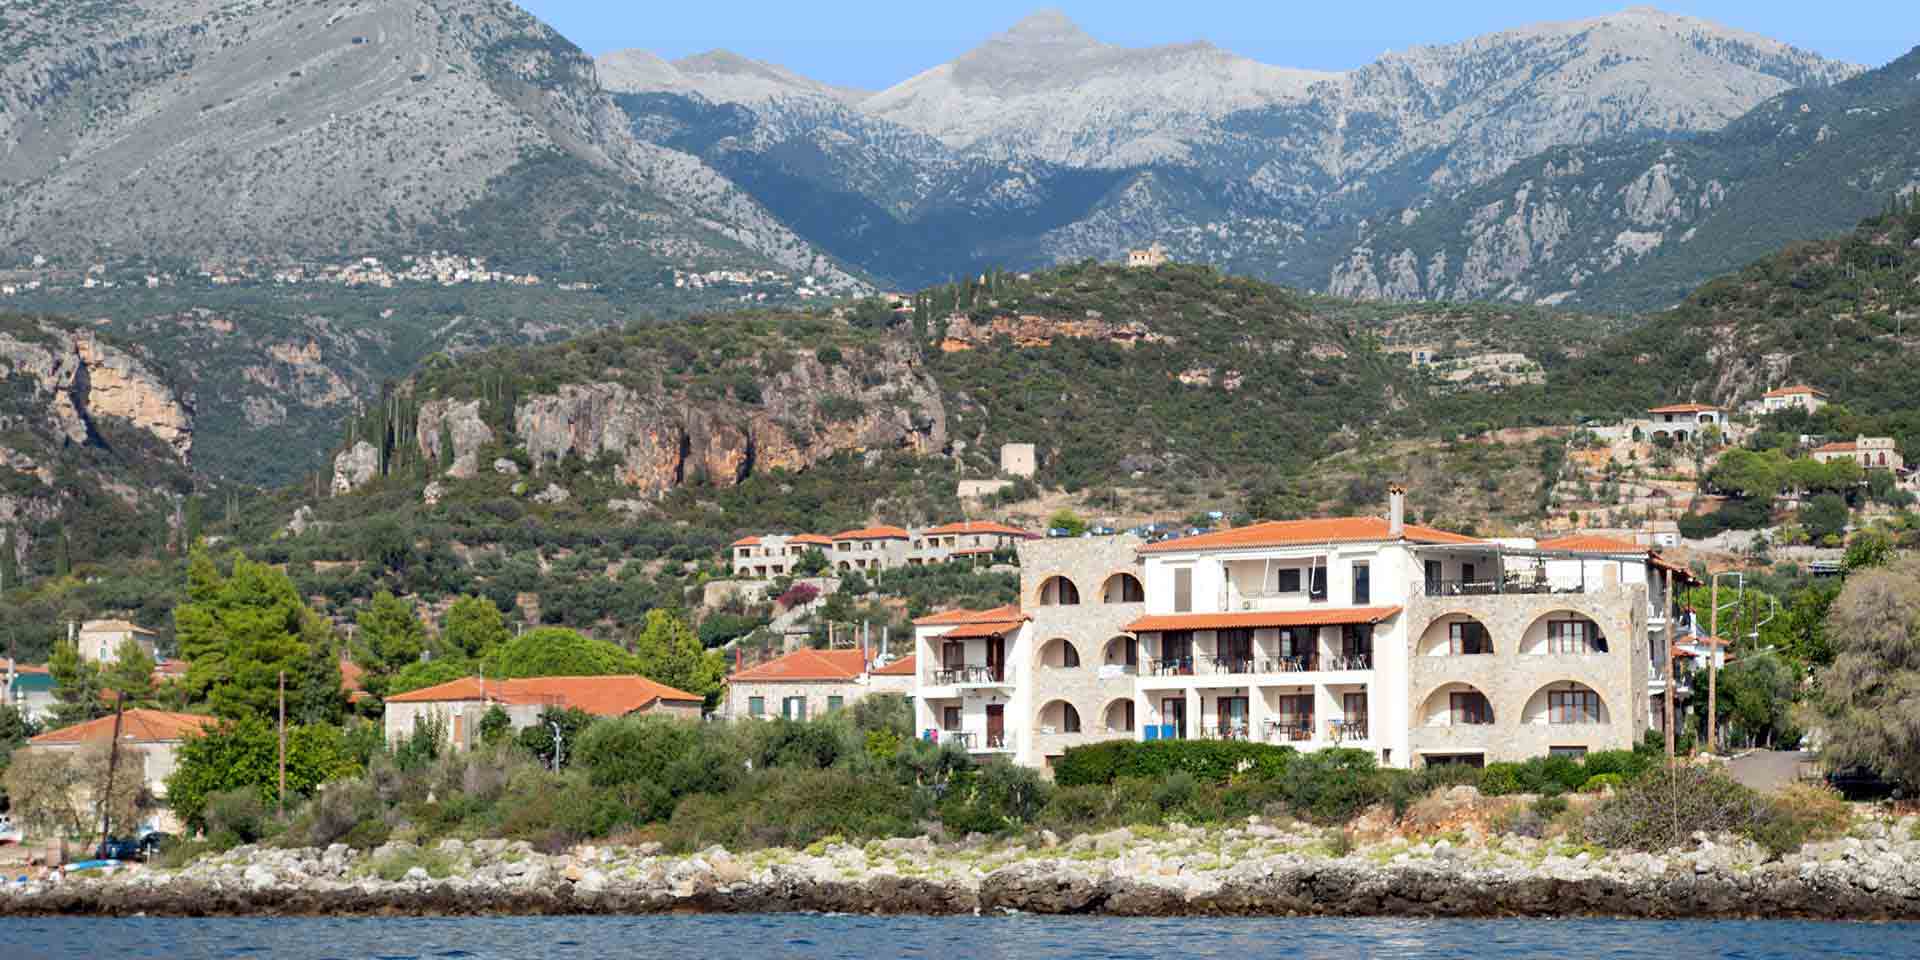 Hotel Liakoto, at the feet of the Taygetos, on the shores of the Mediterranean